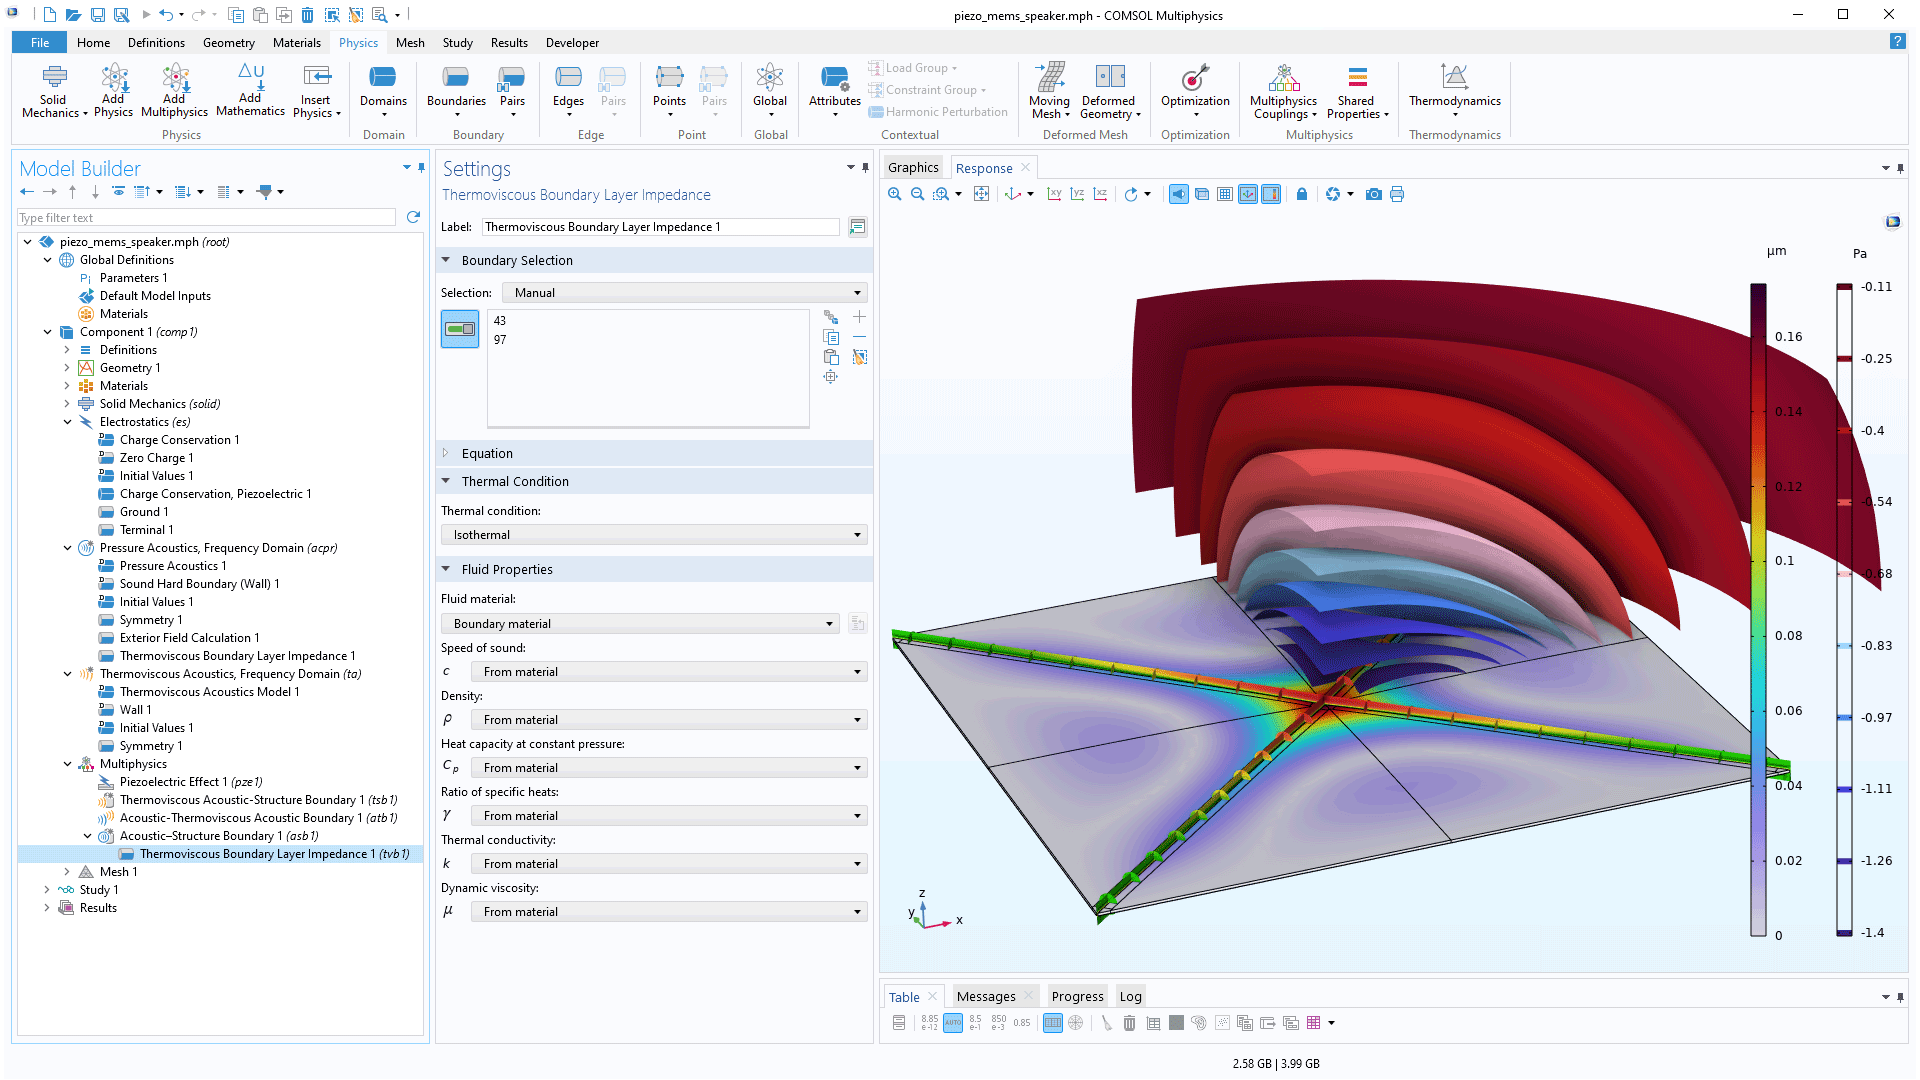 The COMSOL Multiphysics UI showing the Model Builder with the Thermoviscous Boundary Layer Impedance subnode highlighted, the corresponding Settings window, and a piezoelectric MEMS speaker model in the Graphics window.